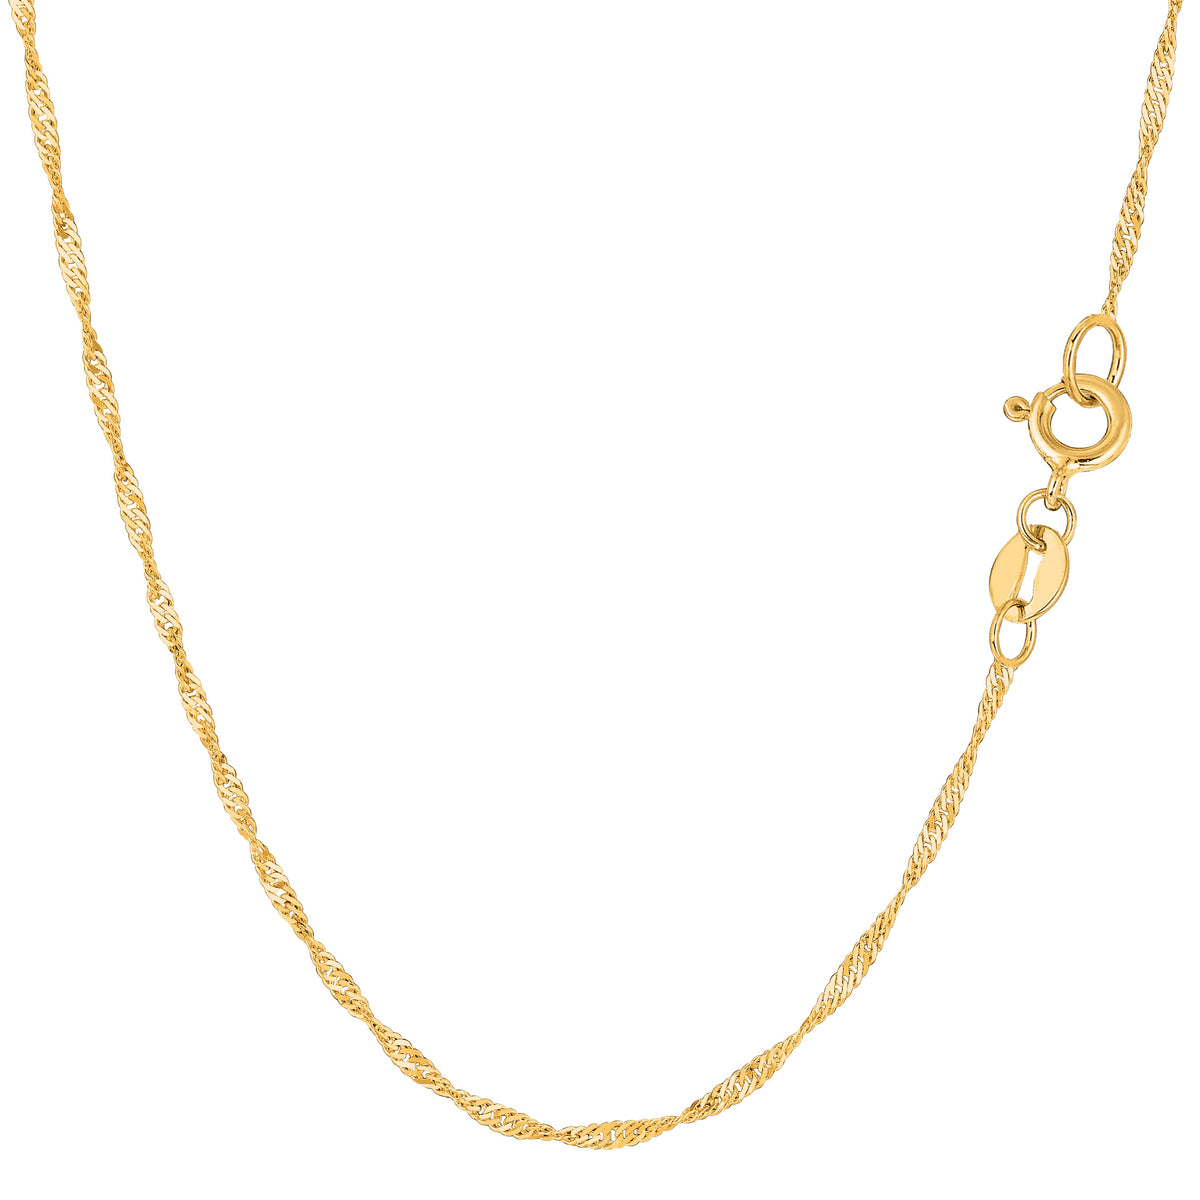 14k Yellow Gold Singapore Chain Necklace, 1.5mm fine designer jewelry for men and women